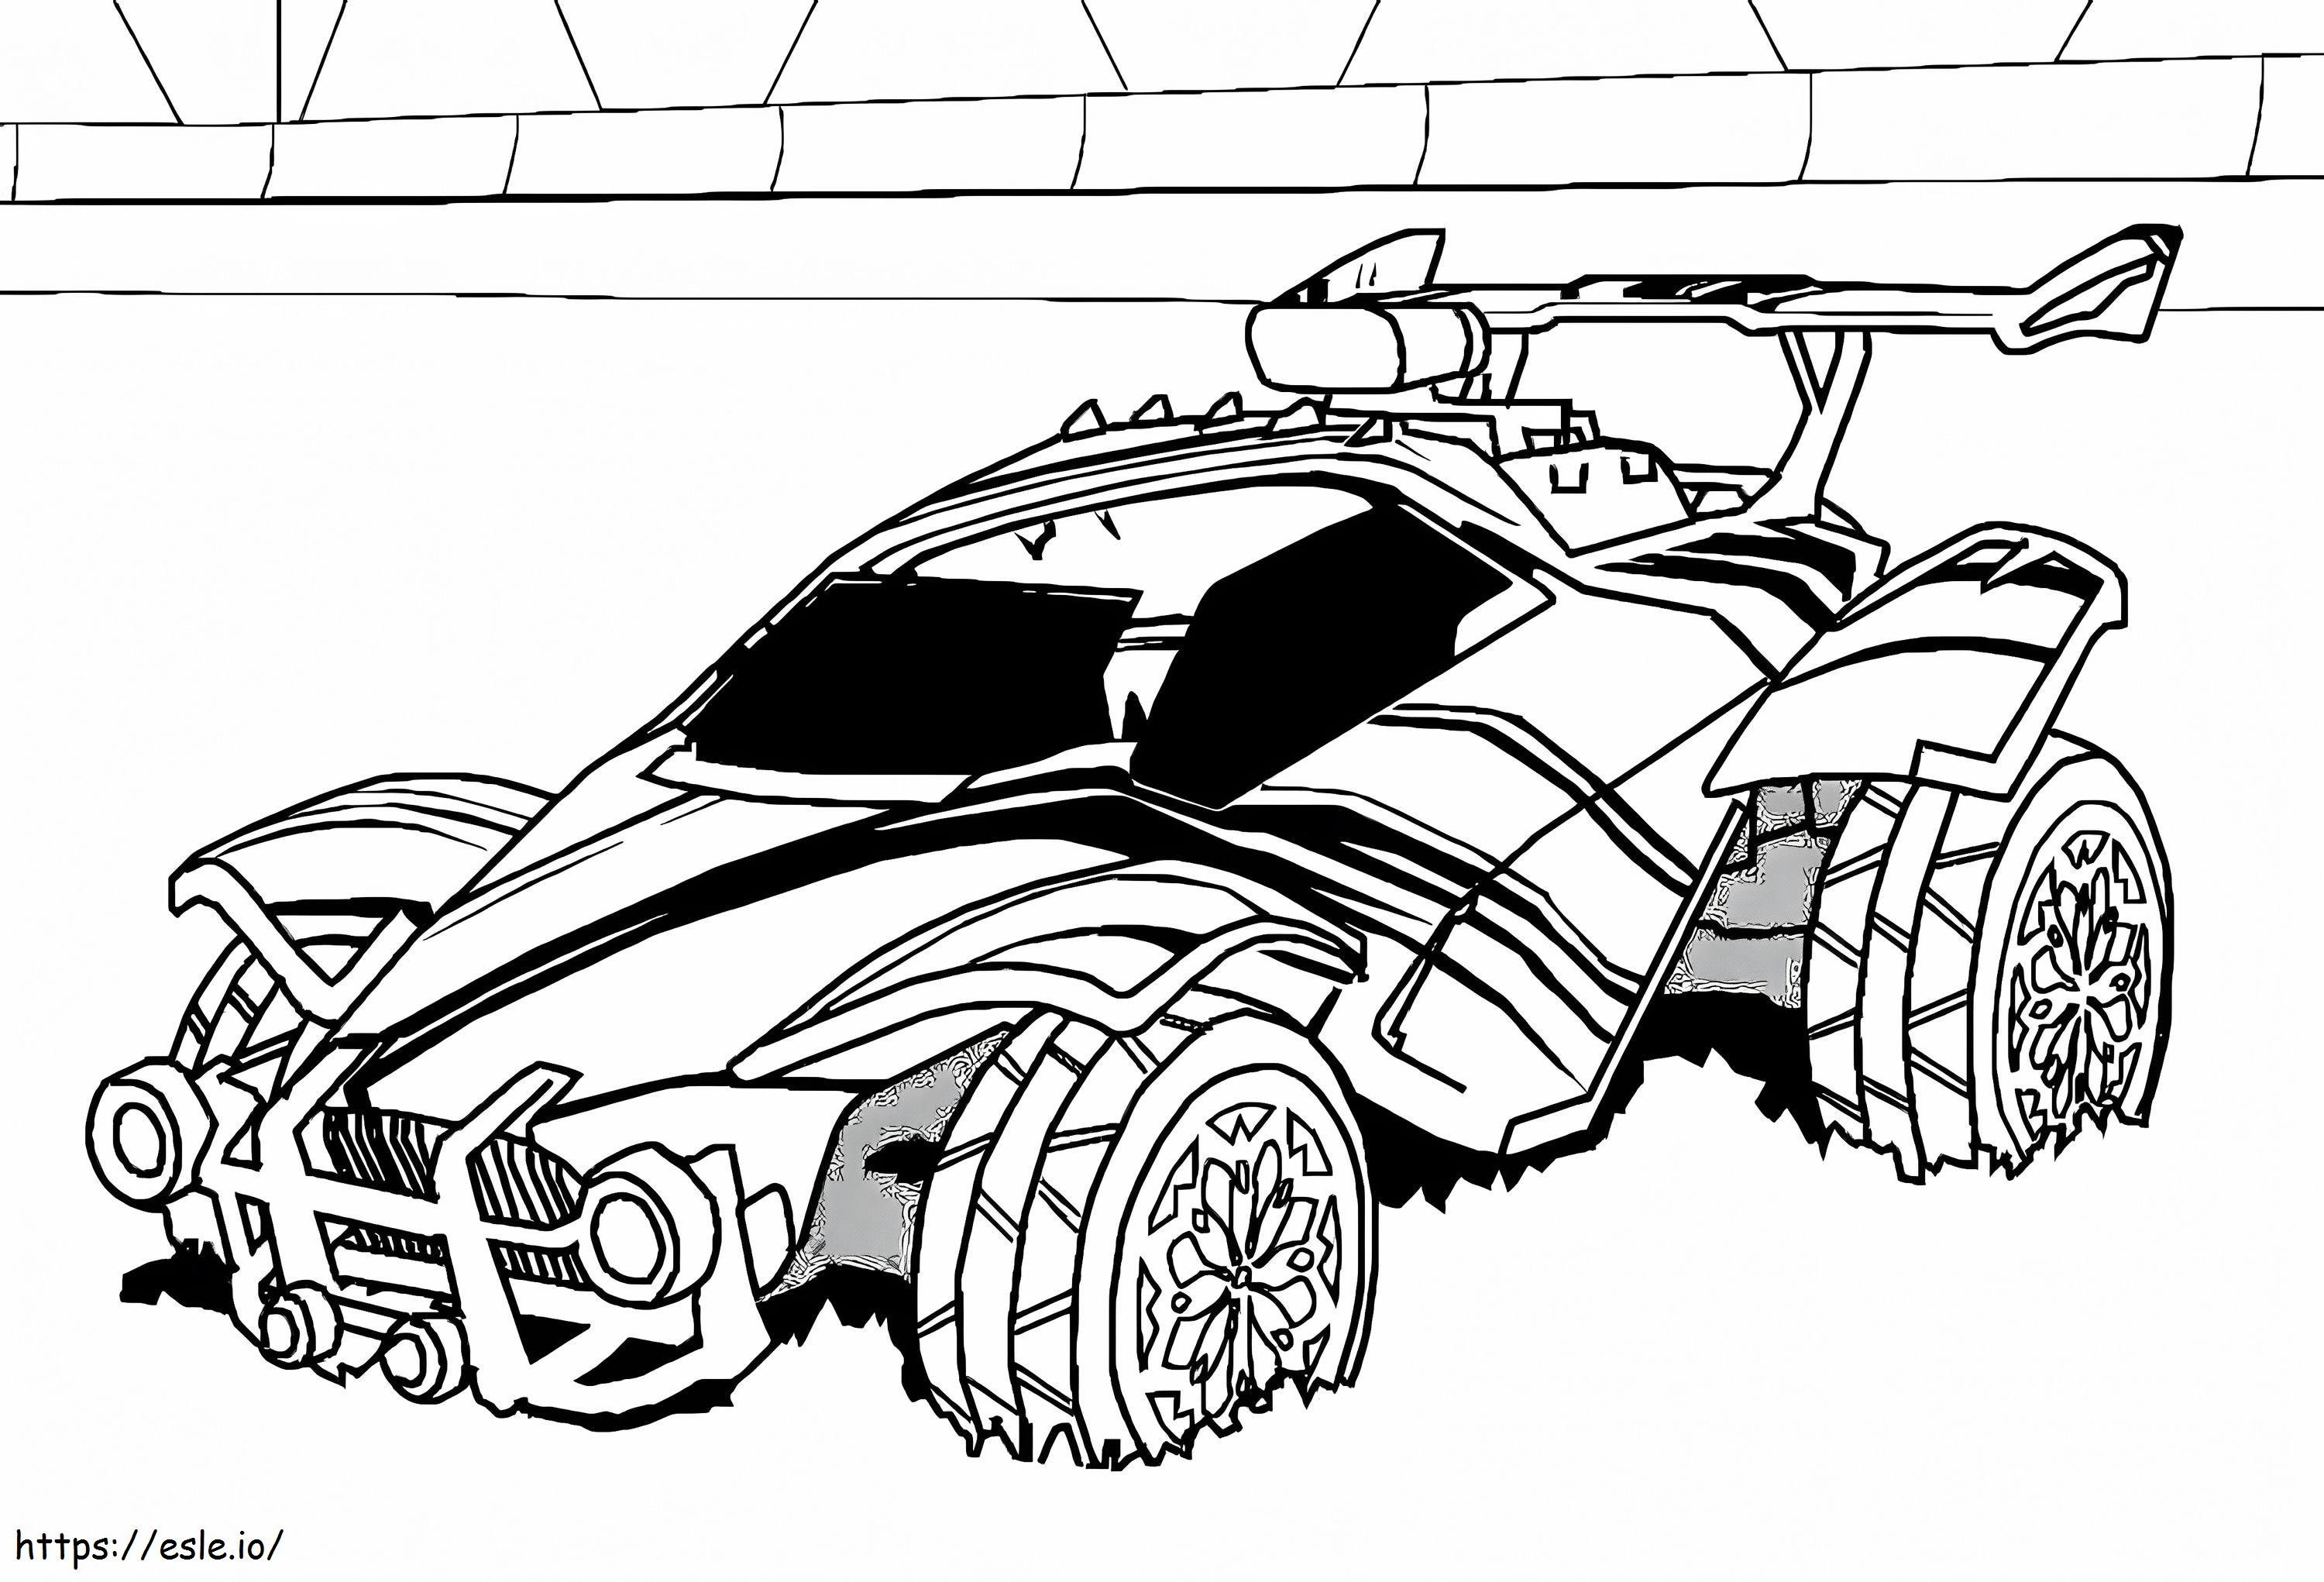 Arena Car coloring page